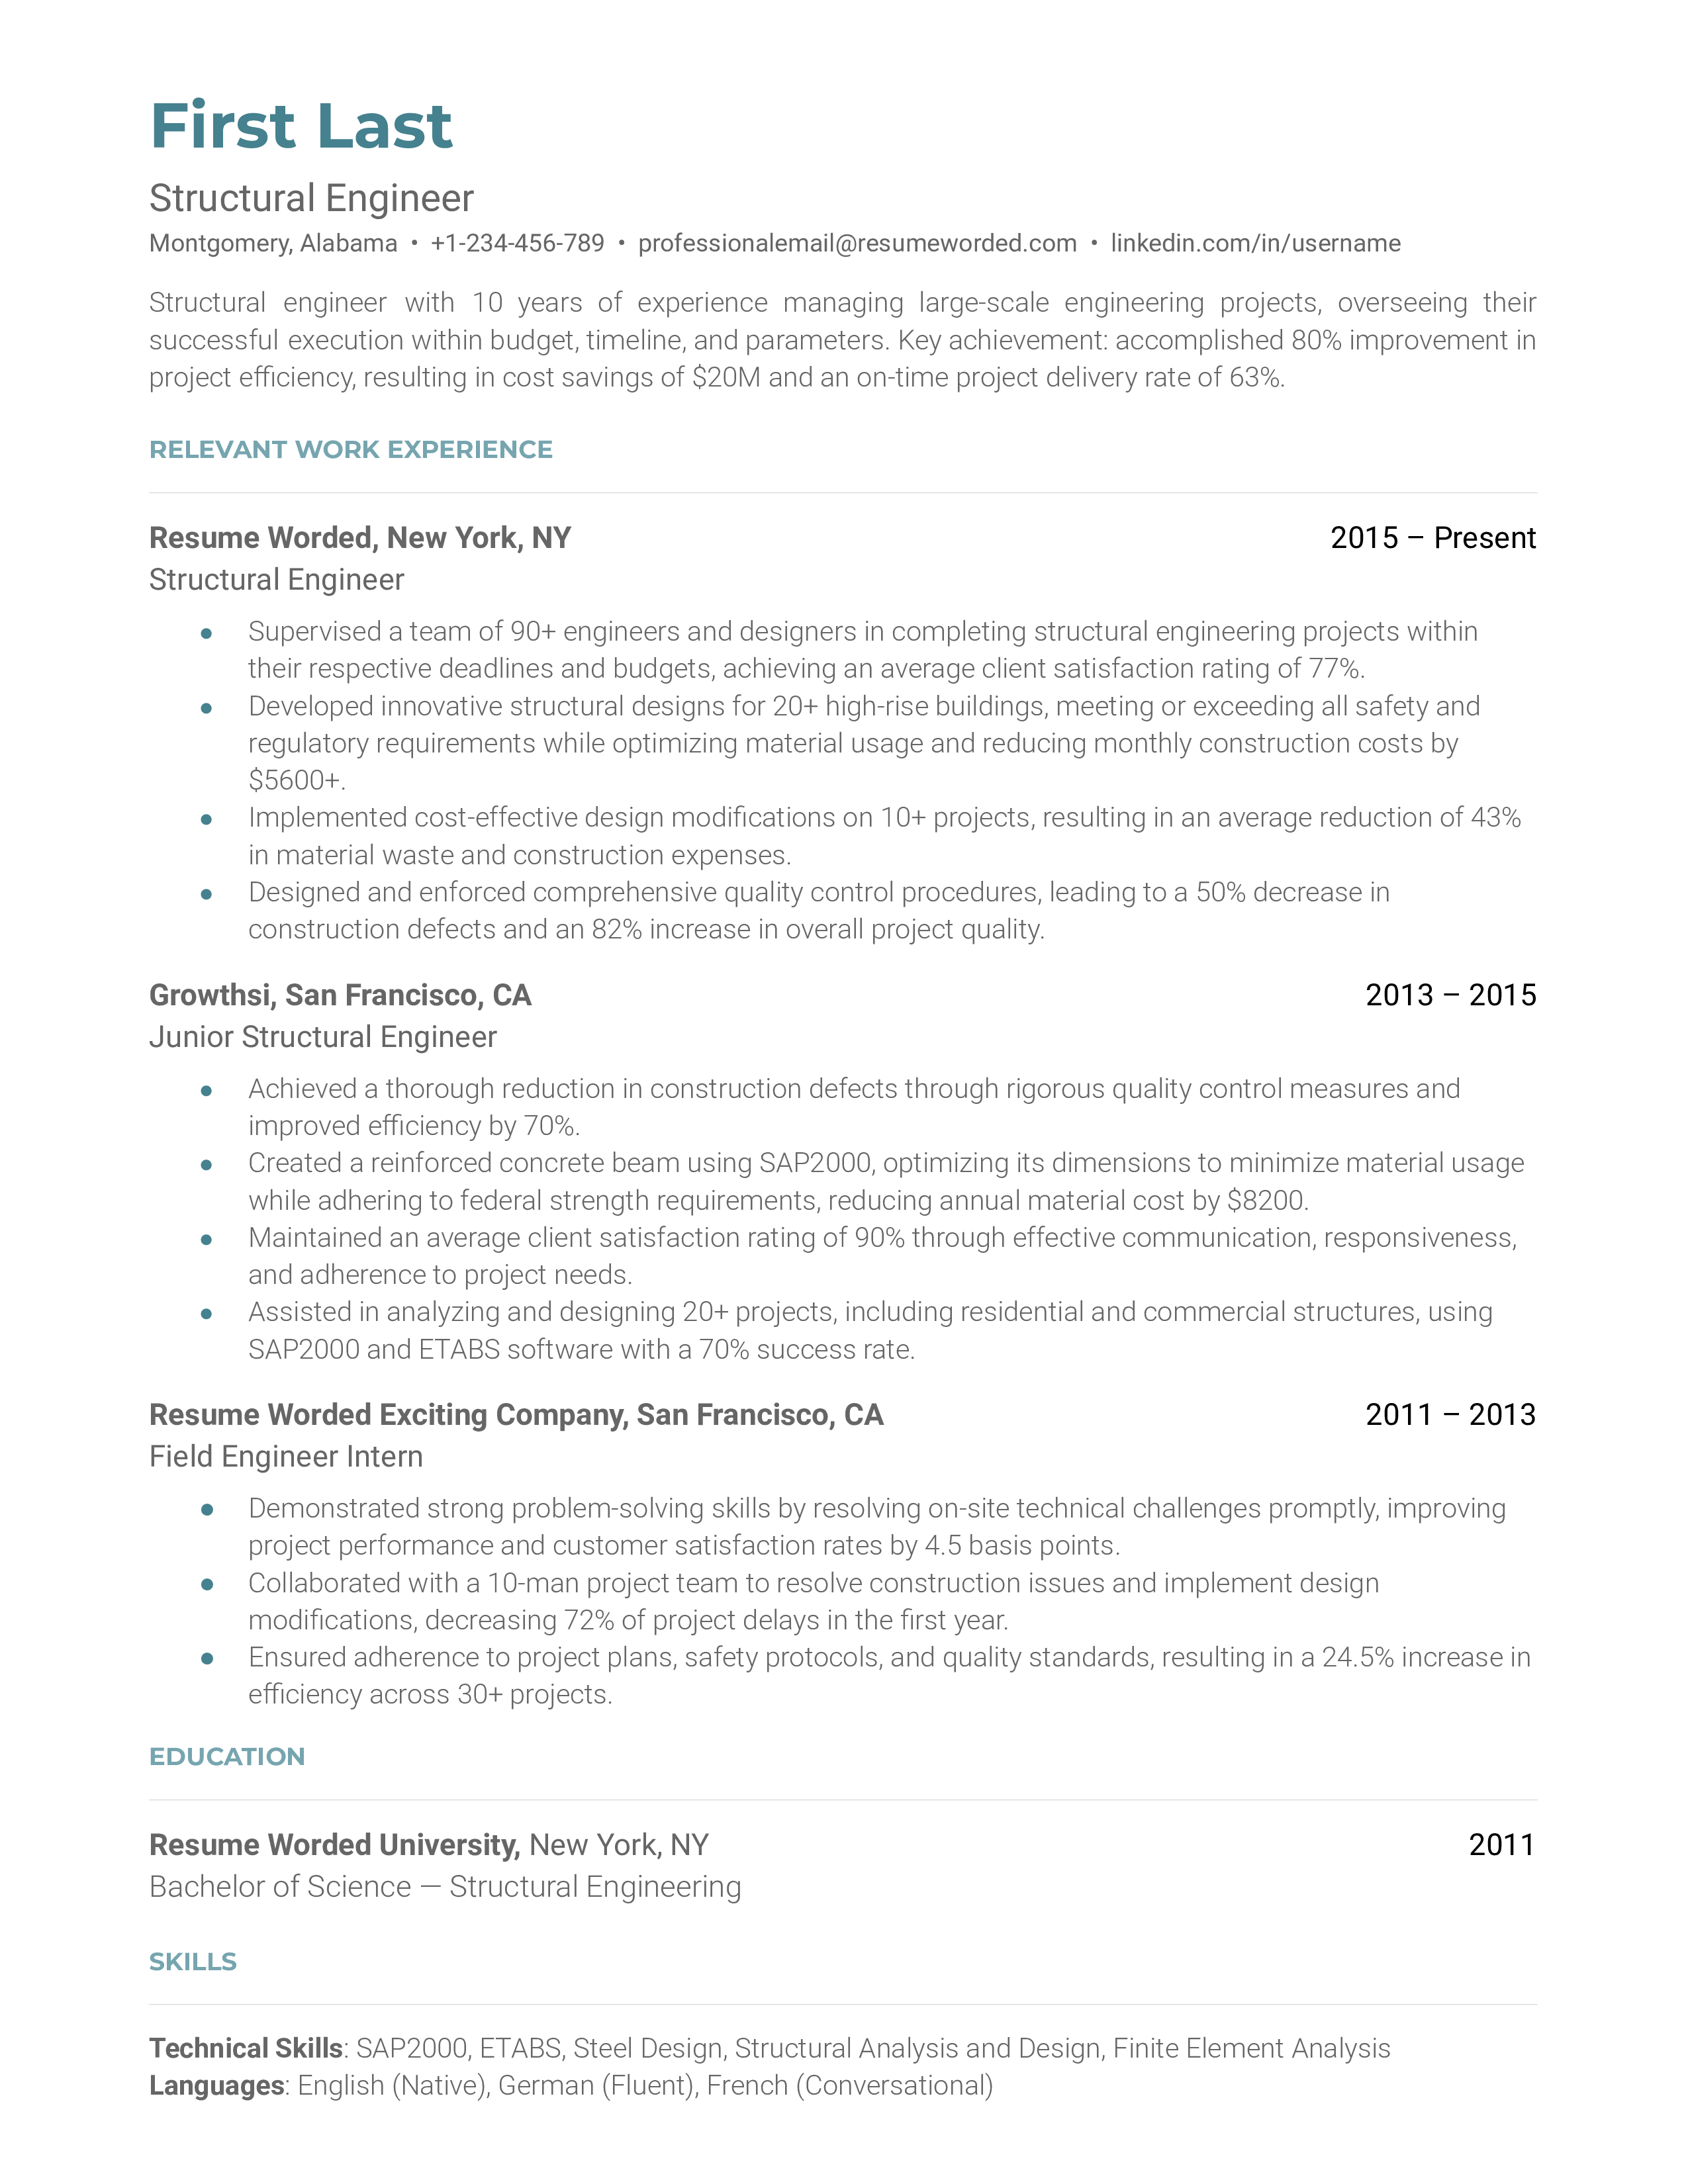 A well-structured CV of a structural engineer with a focus on certifications and software skills.